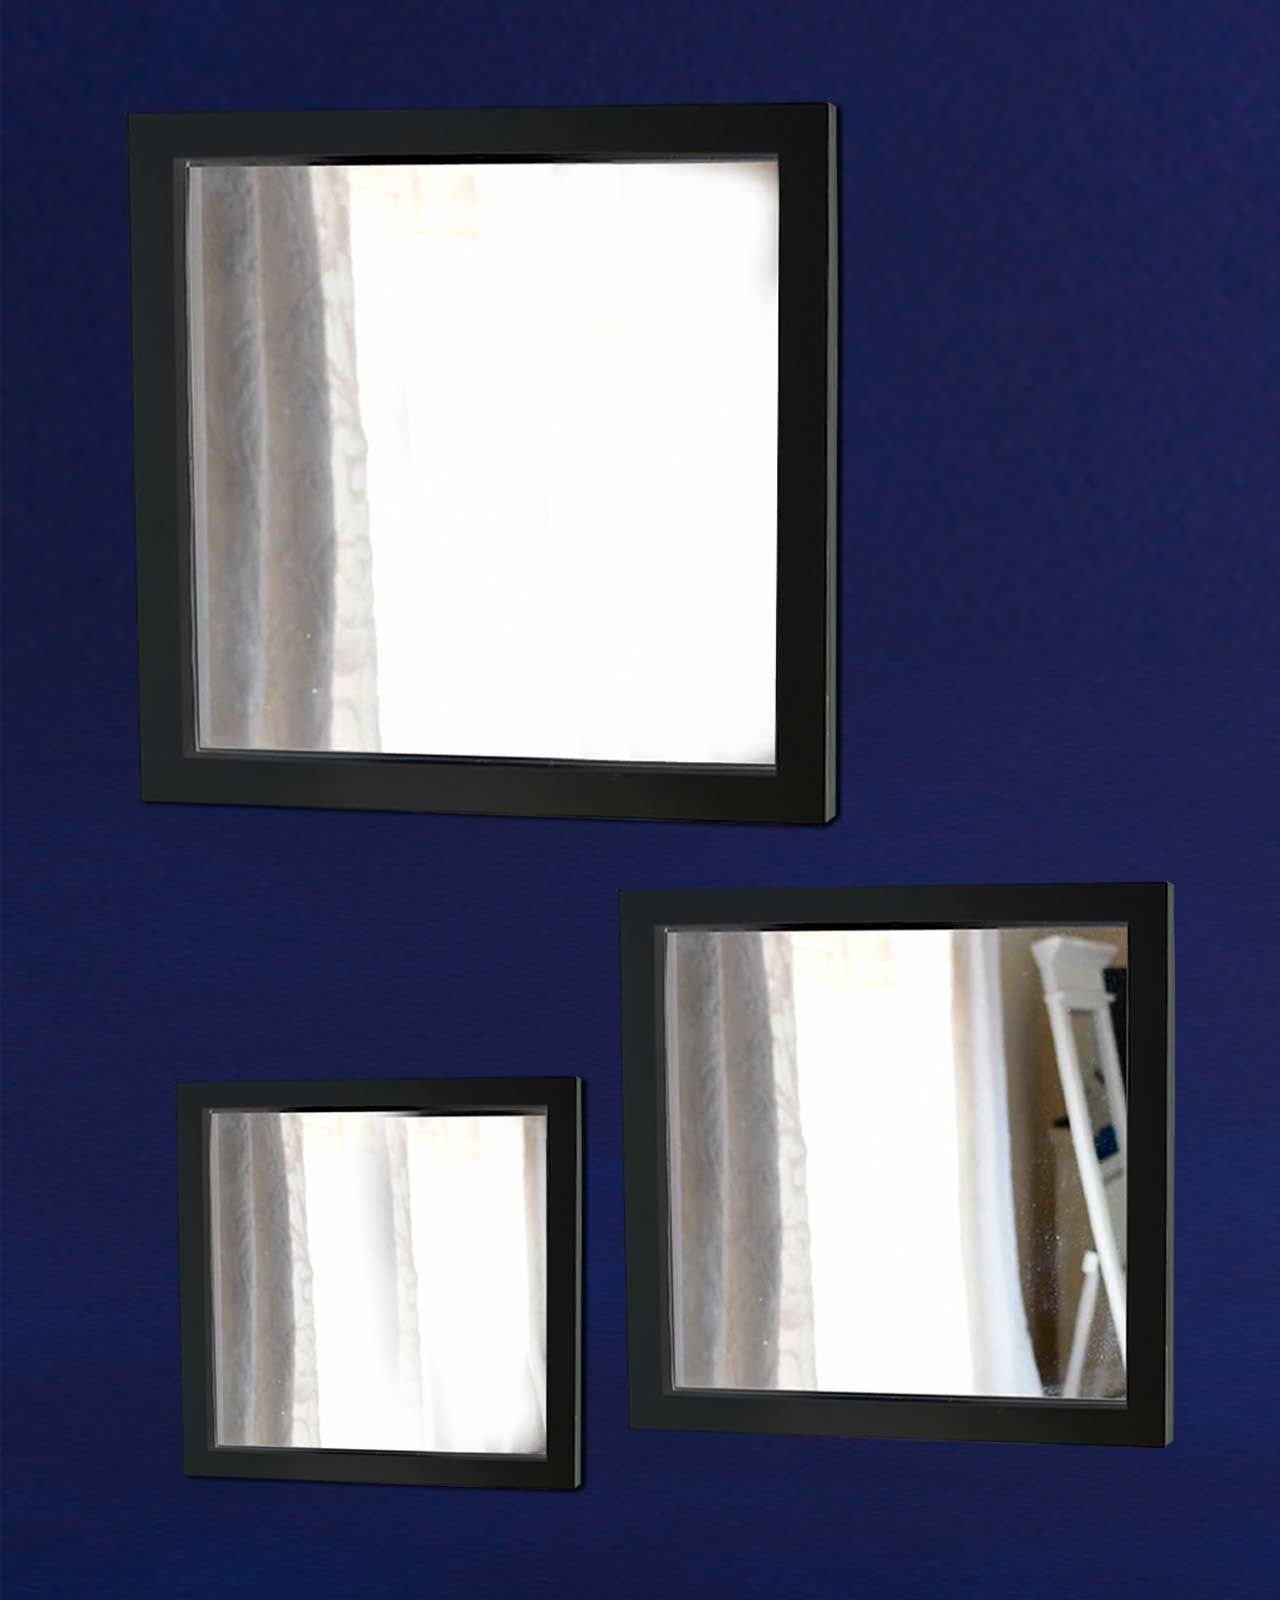 Set Of 3 Square Mirrors, Black | Ebay Pertaining To Black Square Wall Mirrors (View 5 of 15)